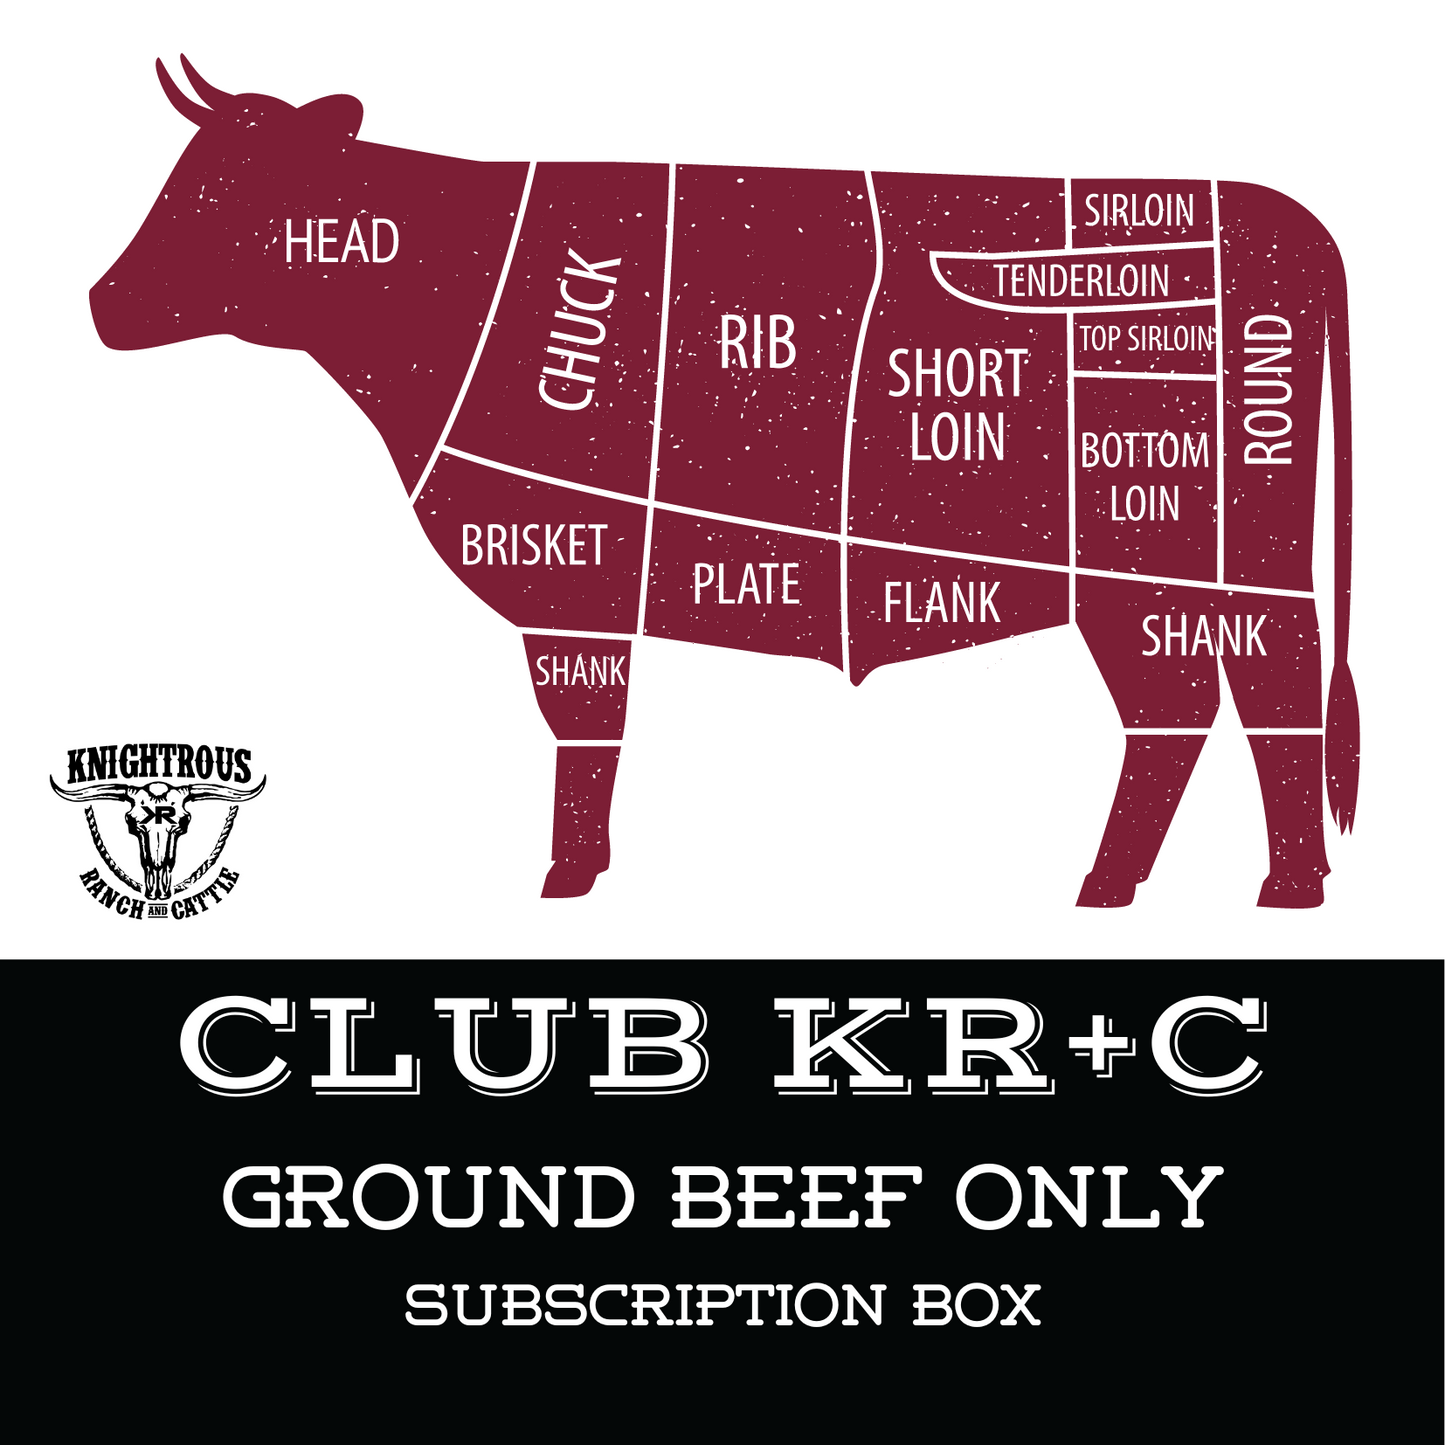 BOX: SUBSCRIPTION CLUB KR+C GROUND BEEF ONLY BOX